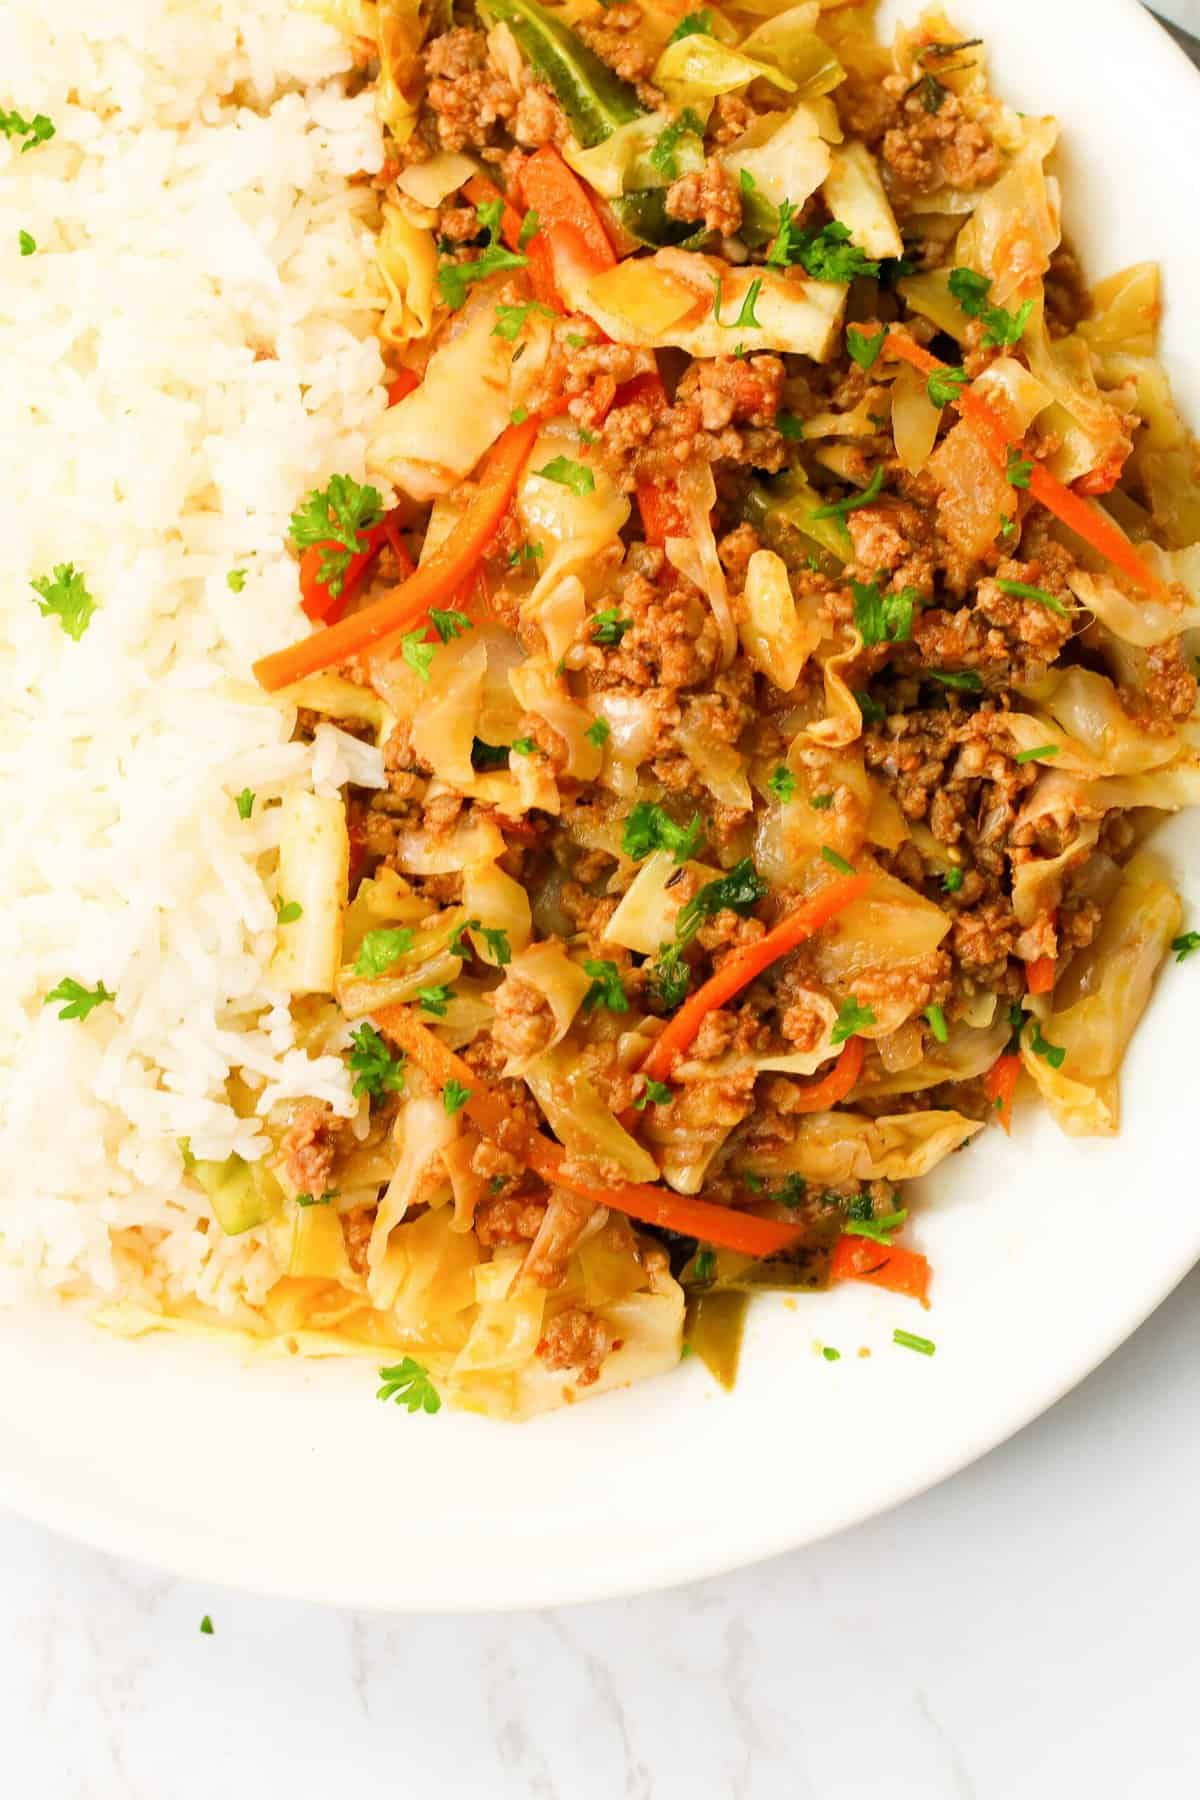 Savory, tasty Ground Beef and Cabbage with rice, perfect for New Years and St. Patrick's Day